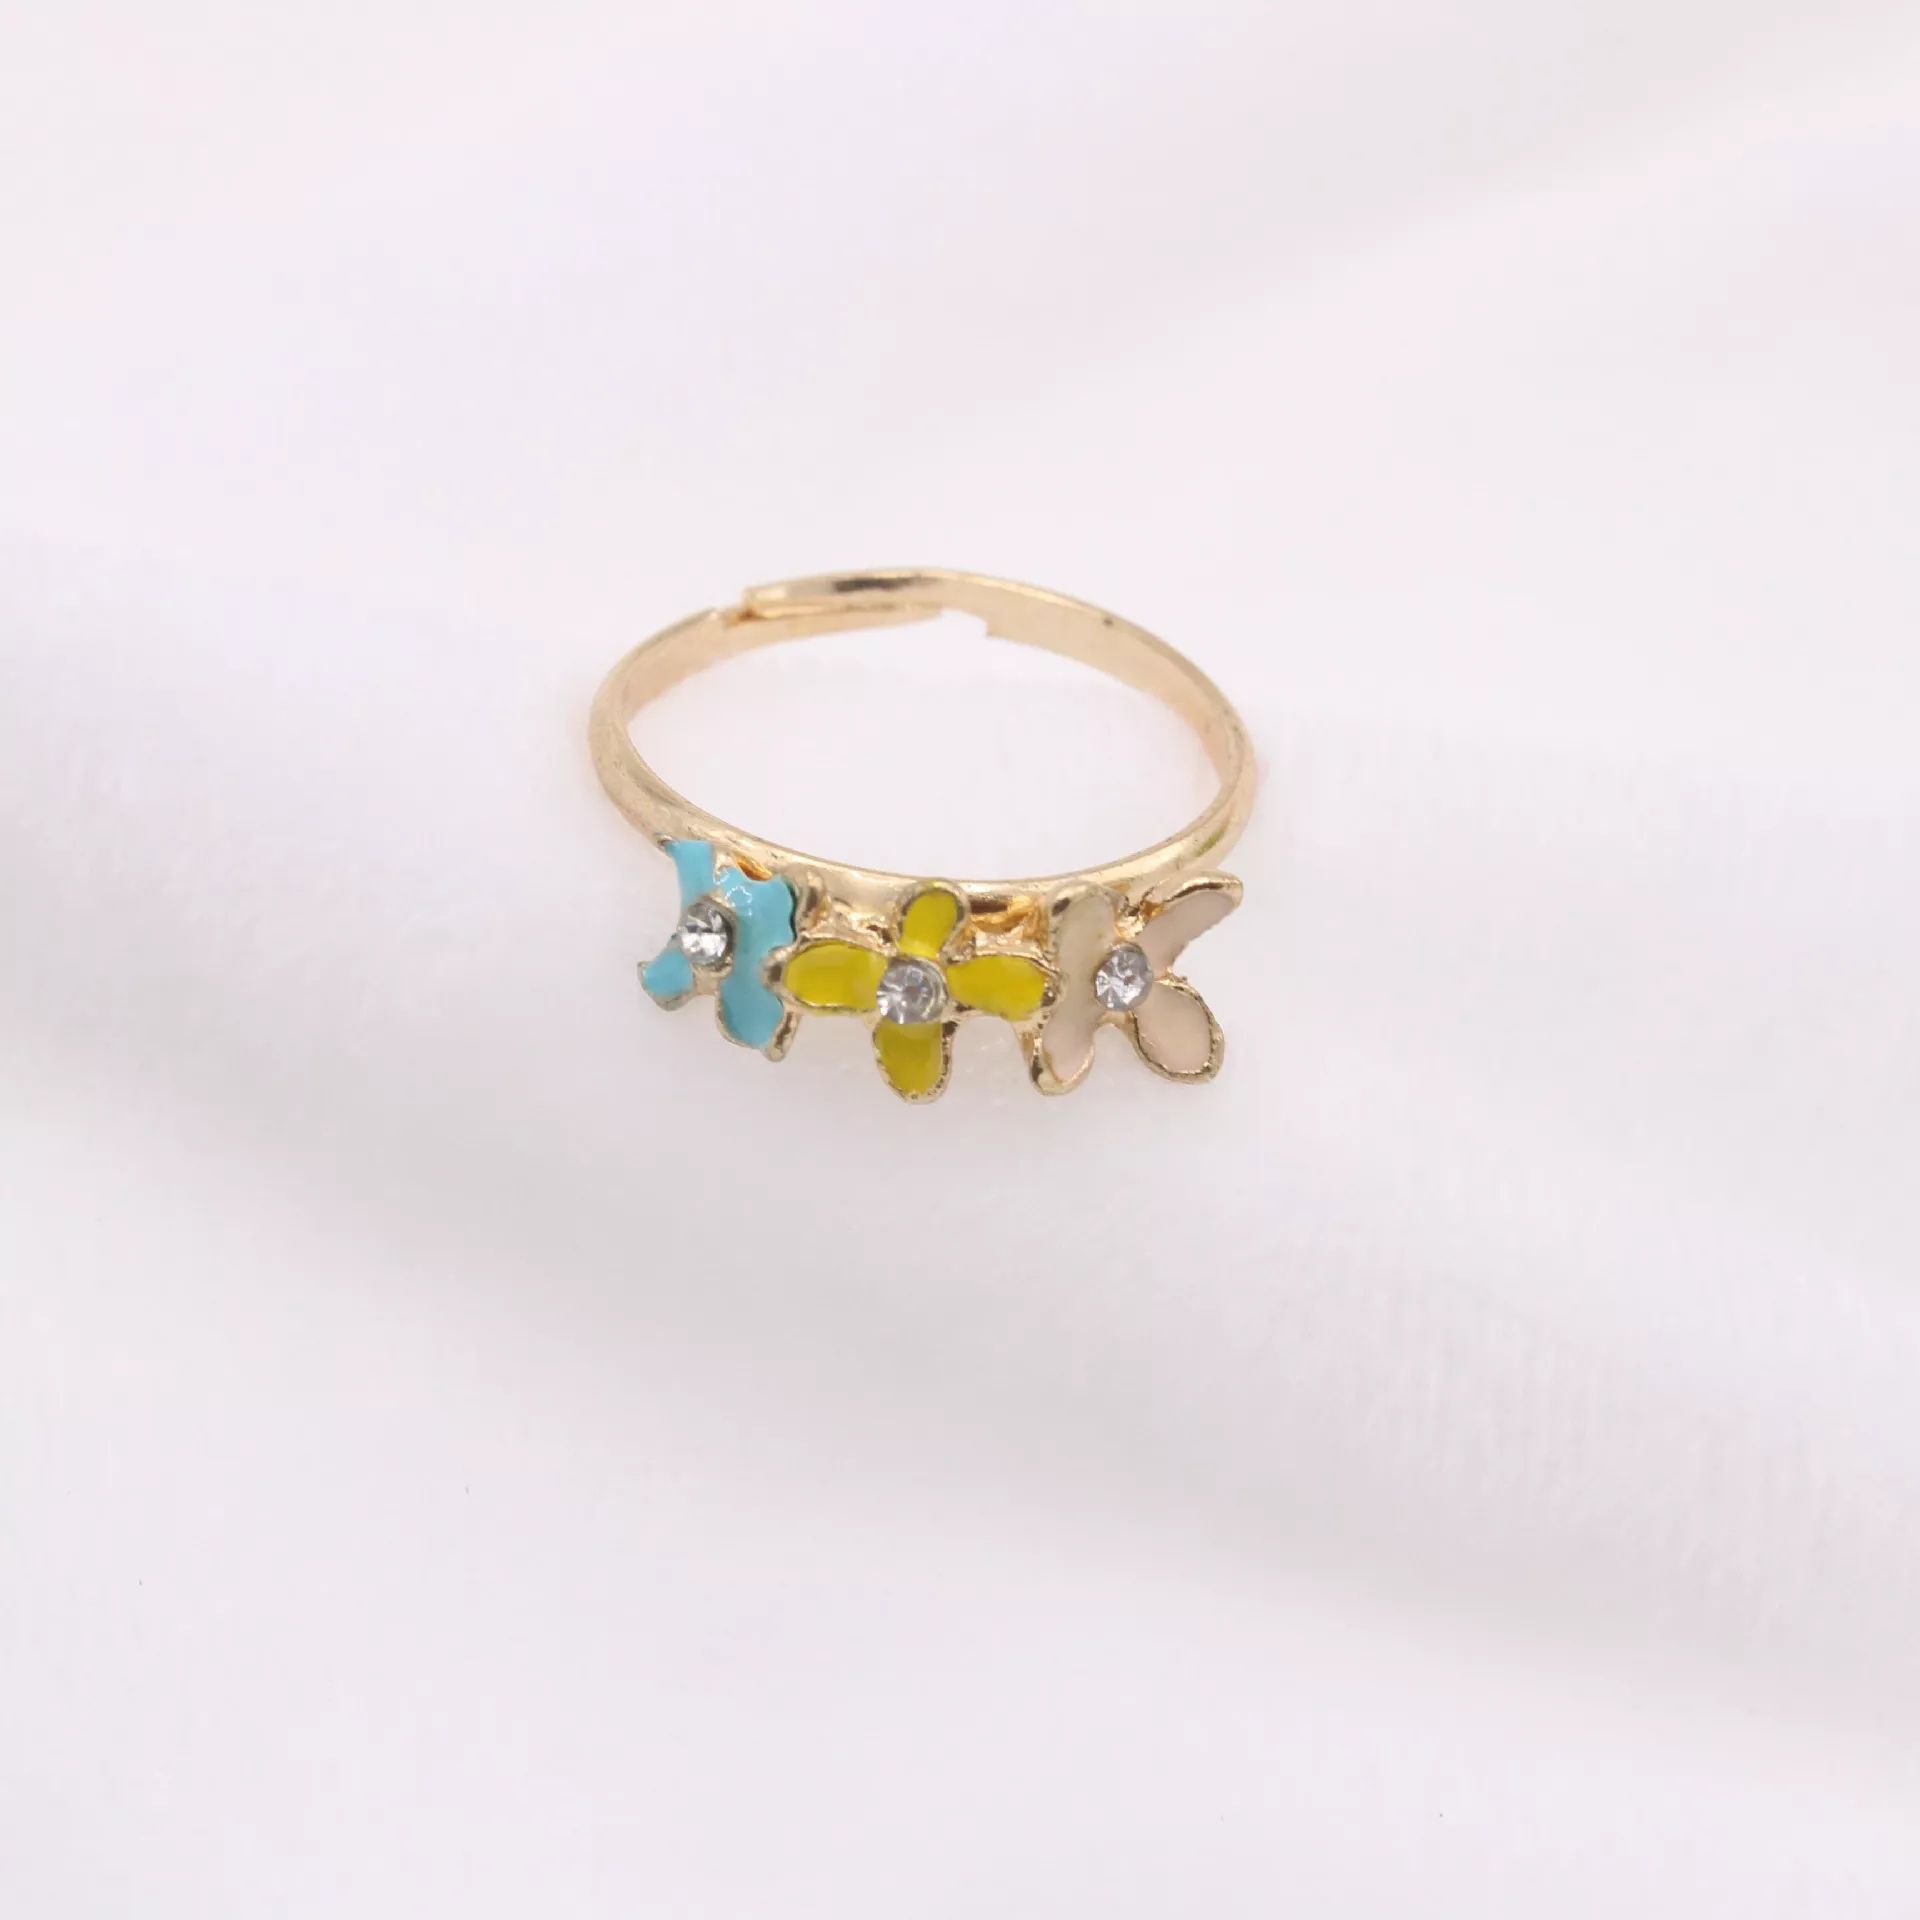 Accessories Small Refreshing Daisy Flower Rings Fashion Diamonds Dripping  Oil Yiwu Accessories Pertaining To Best And Newest Daisy Flower Rings (View 16 of 25)